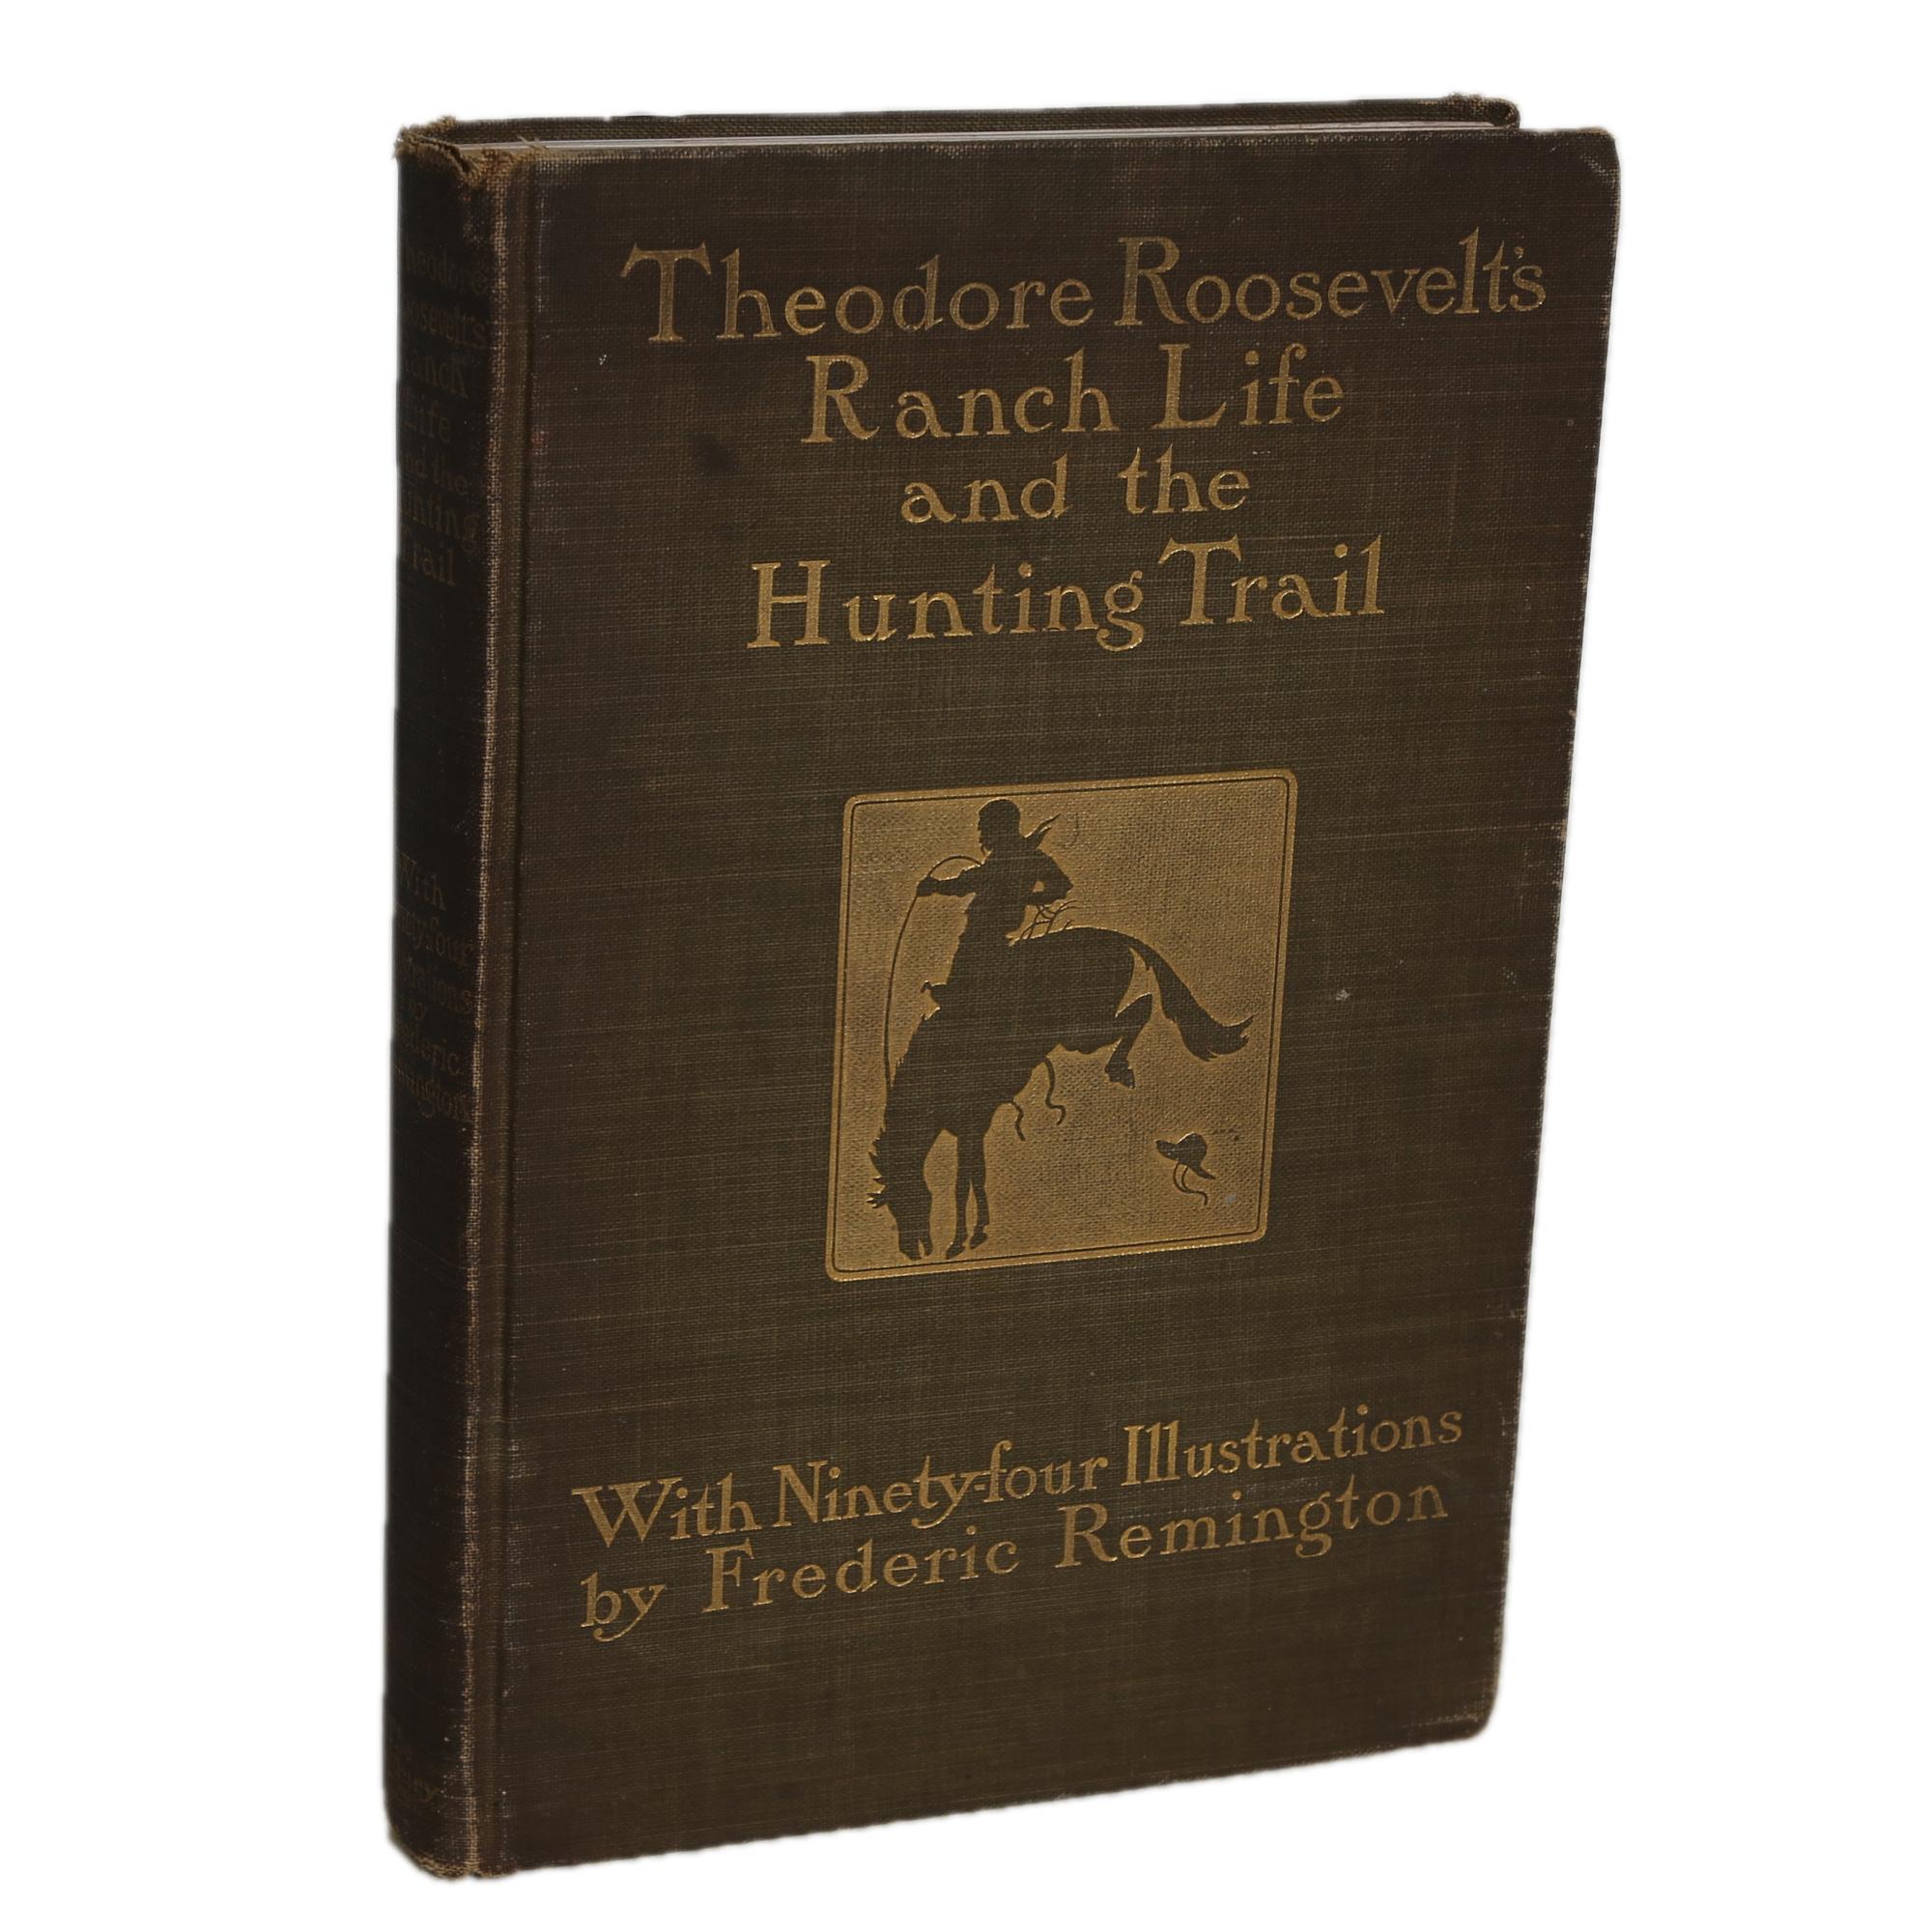 Roosevelt's Ranch Life and the Hunting Trail, Illustrated by Frederic Remington 